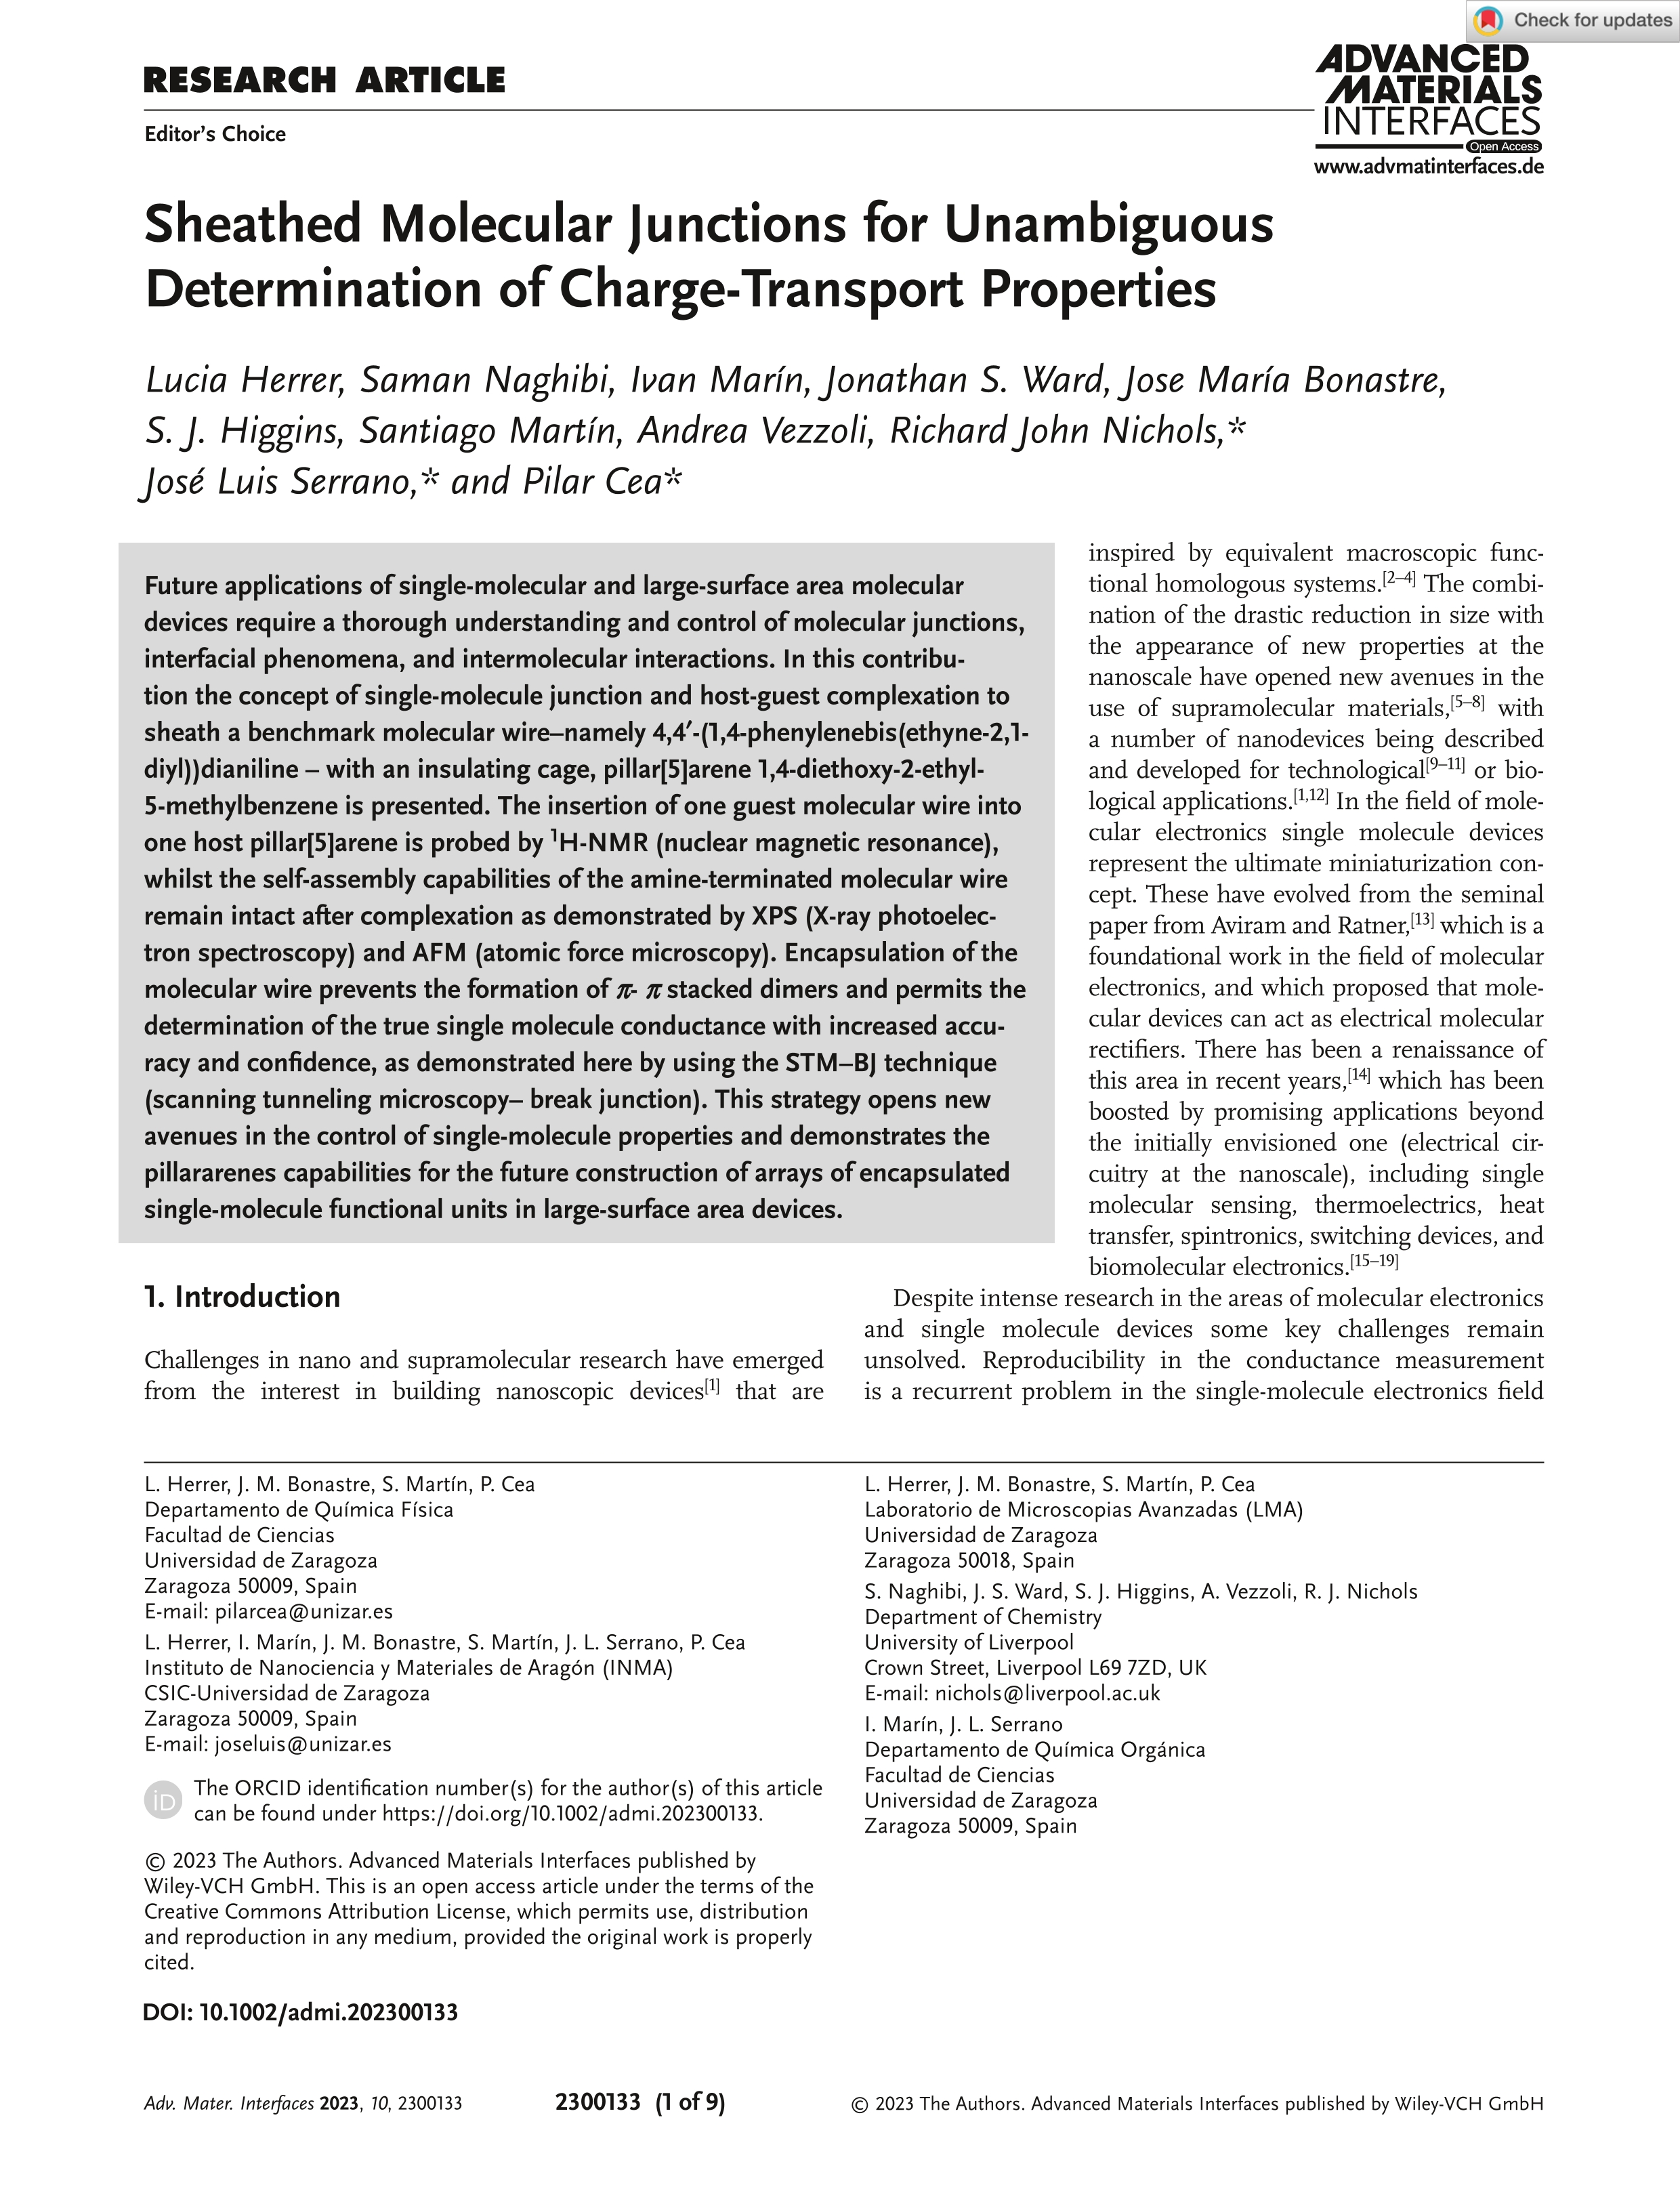 Sheathed molecular junctions for unambiguous determination of charge-transport properties